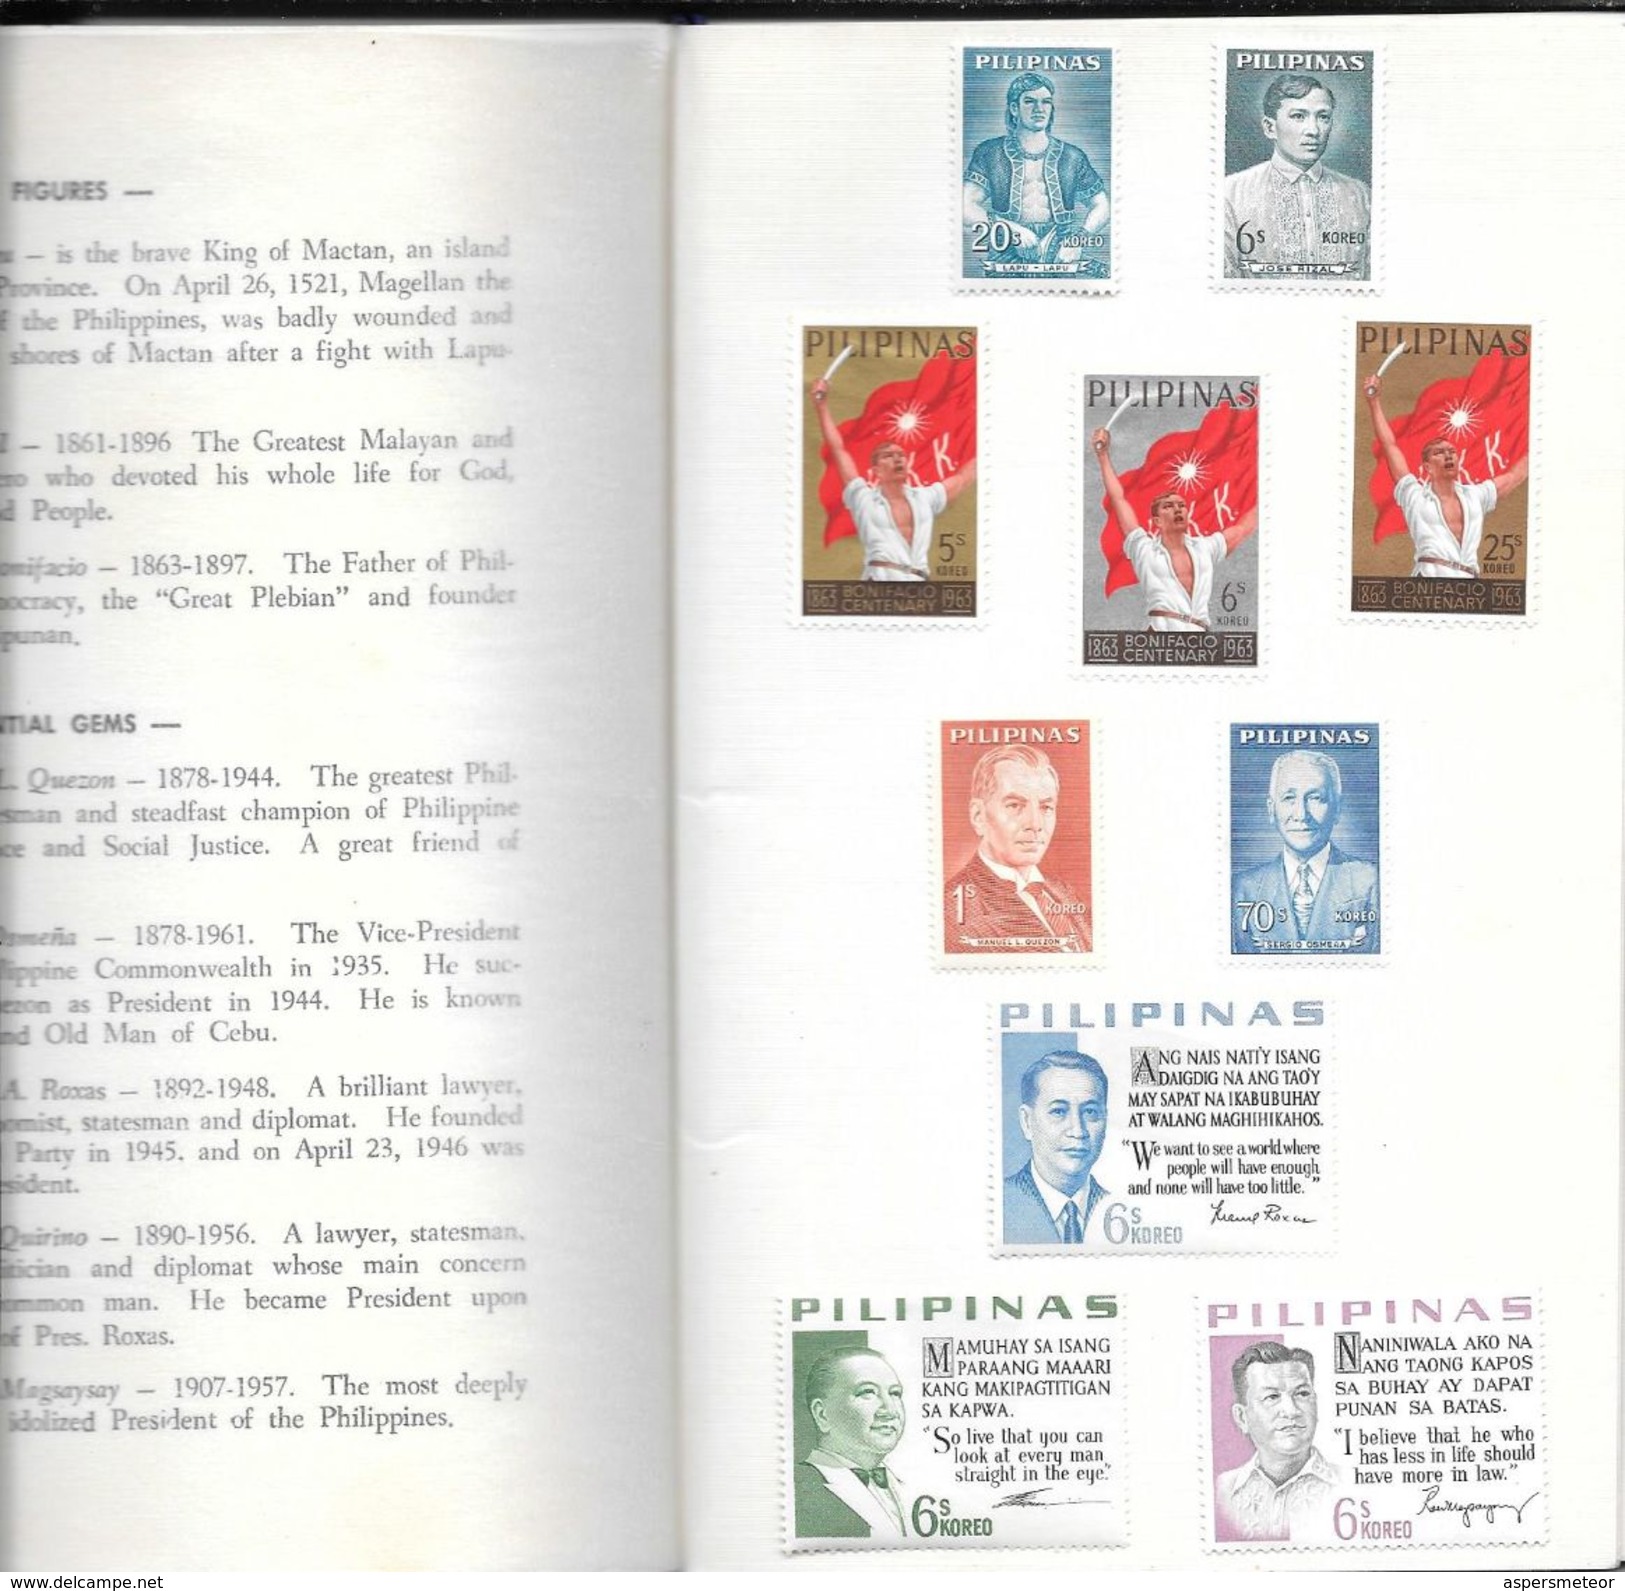 PHILIPPINE COMMEMORATIVE STAMPS 1965 ITU PLENIPOTENTIARY CONFERENCE MONTREUX SWITZERLAND WITH THE COMPLIMENTS OF A. - Philippines